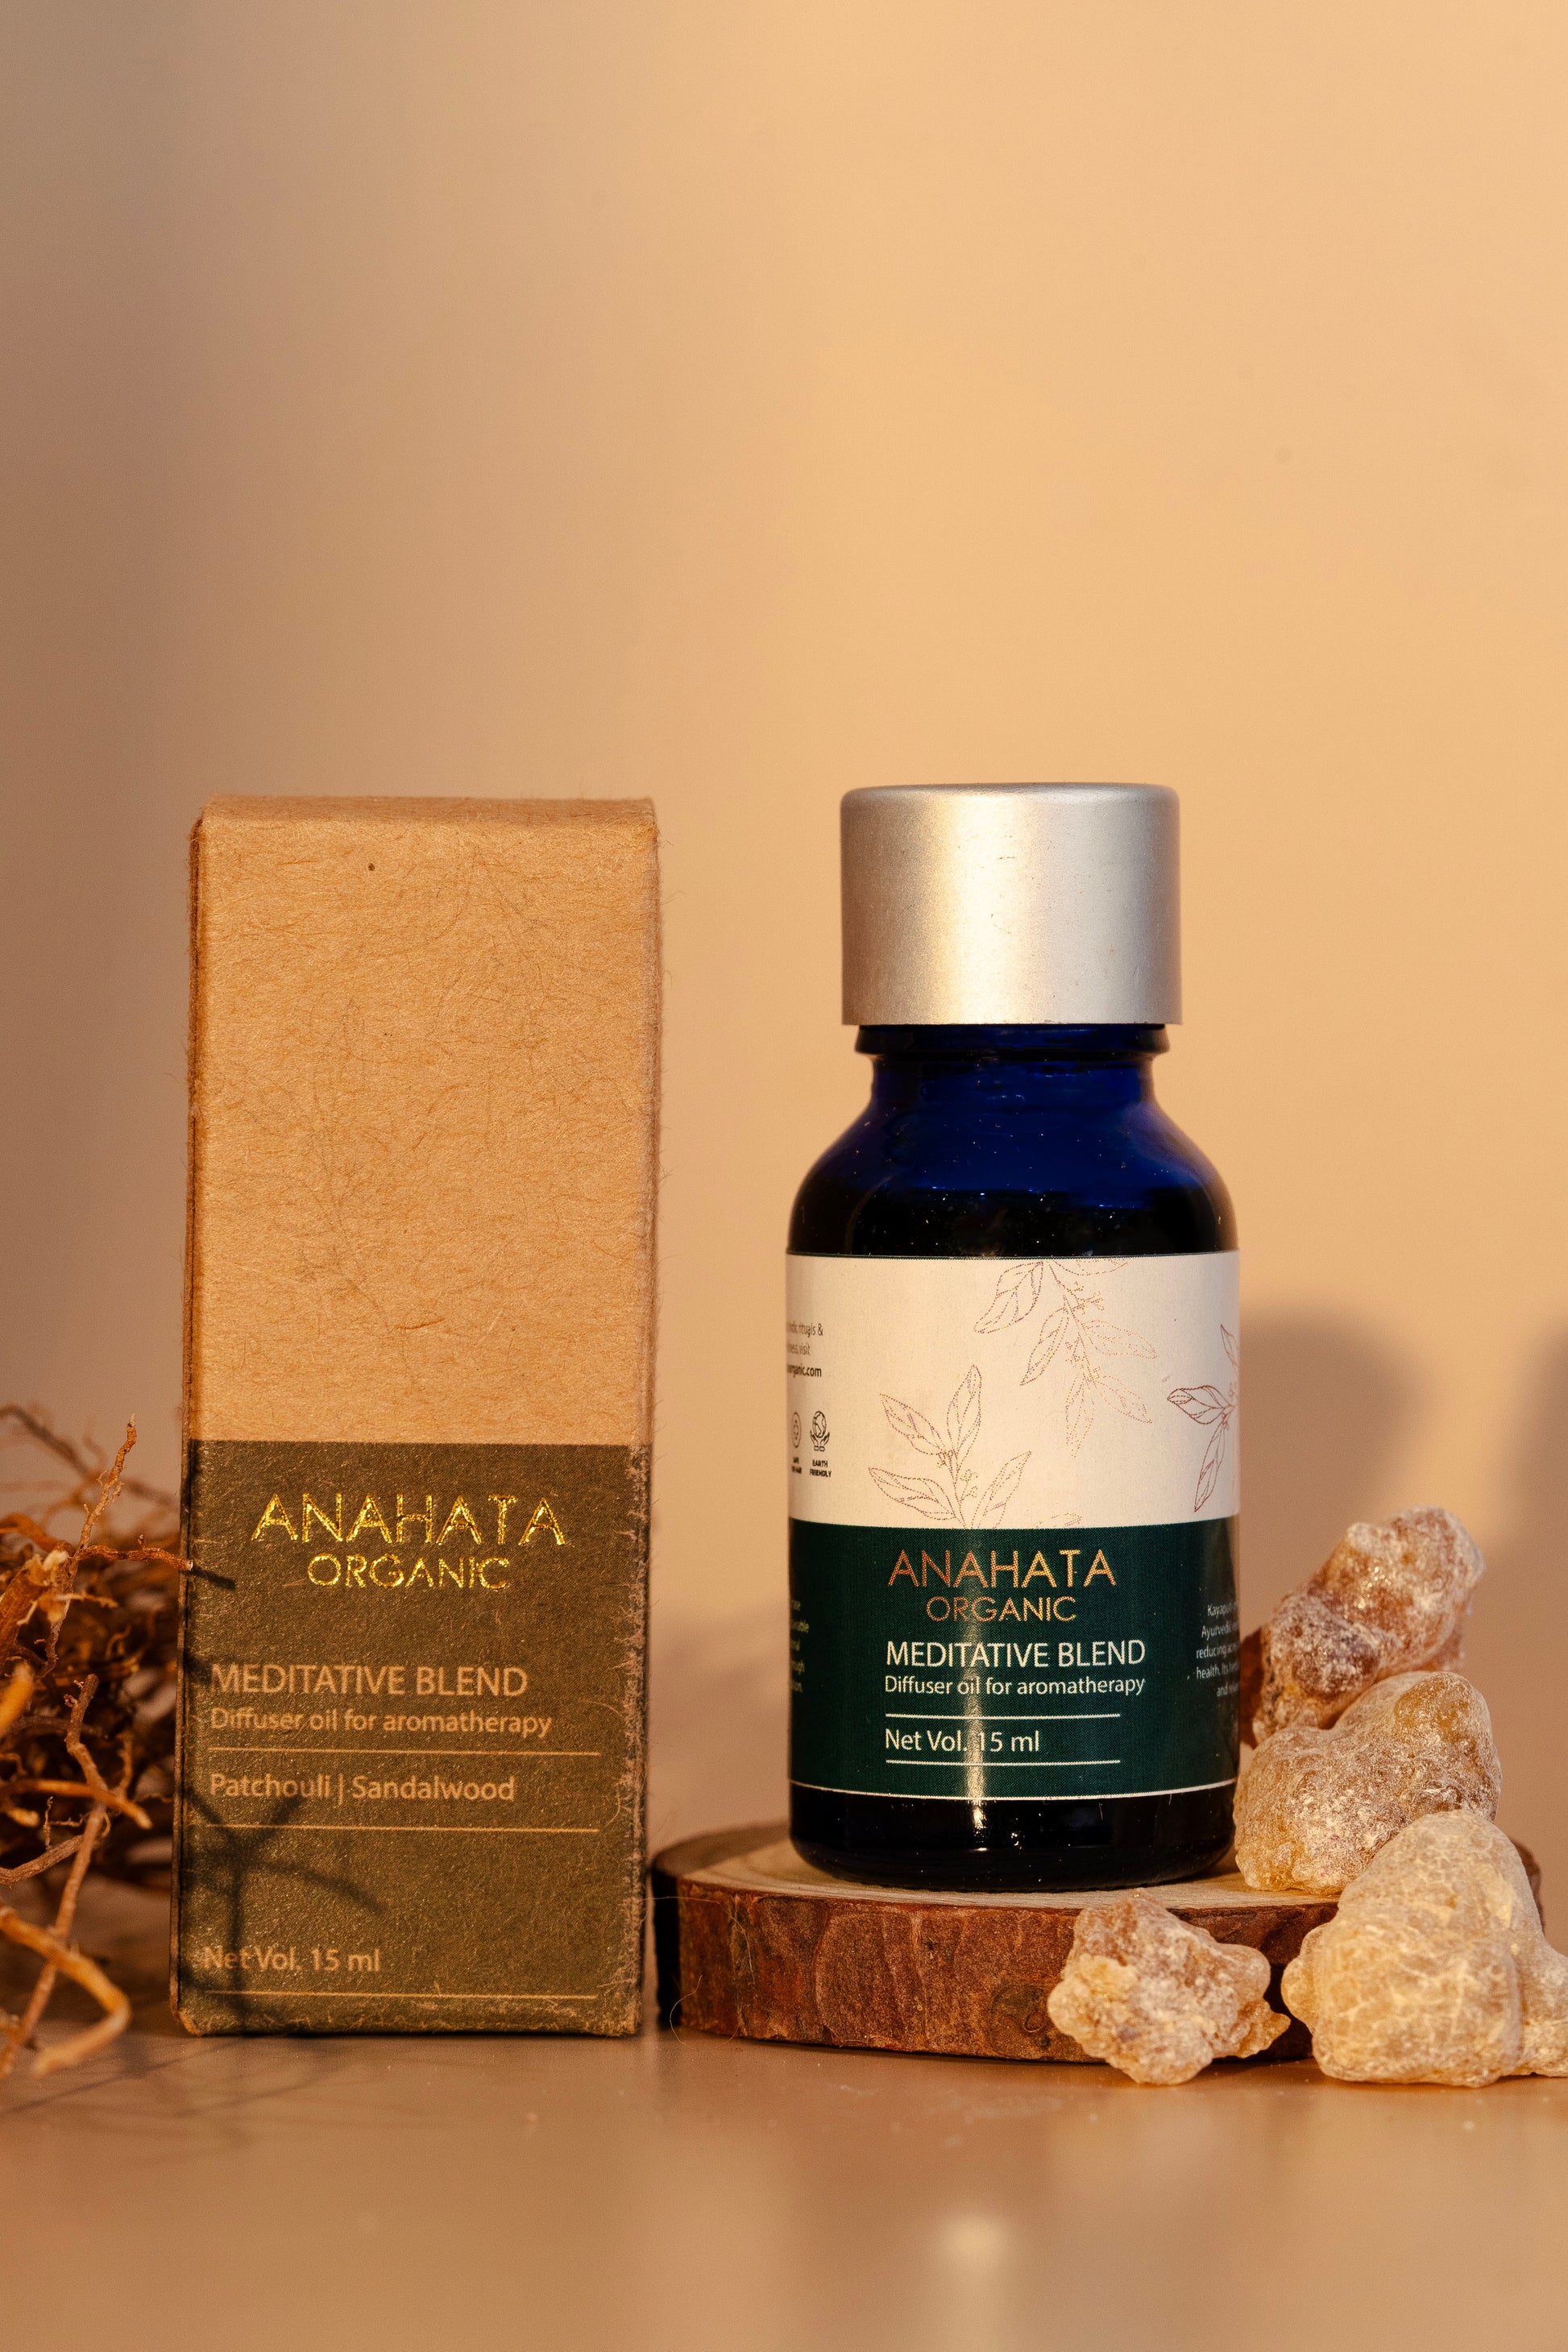 Meditative Blend diffuser oil for aromatherapy - Anahata Organic